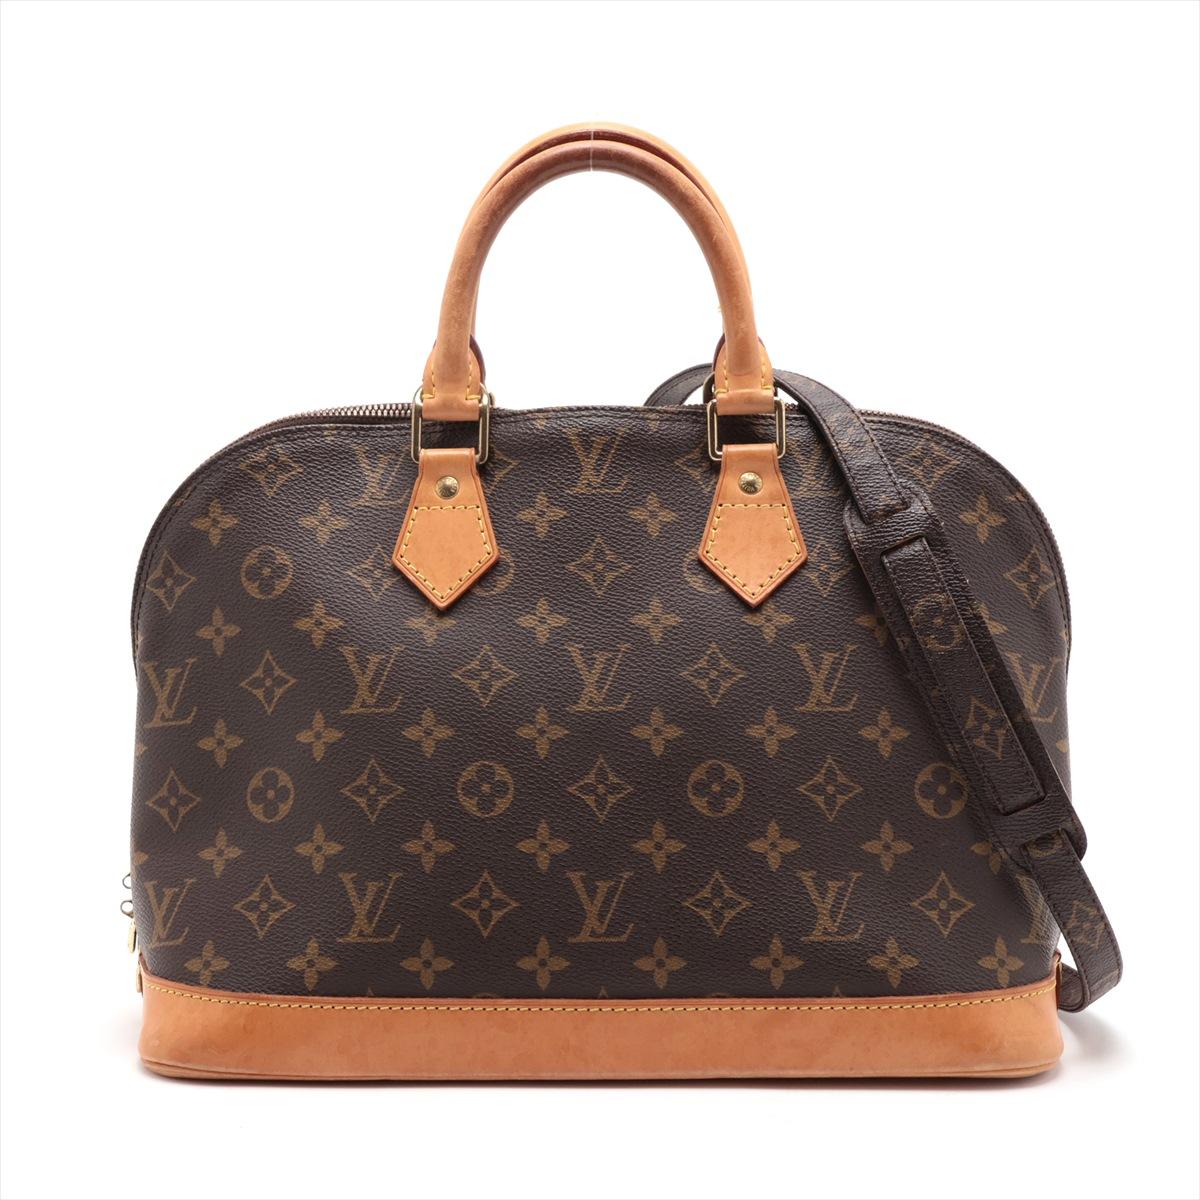 The Louis Vuitton Monogram Alma with Strap is an iconic and sophisticated handbag that seamlessly combines timeless design with modern functionality. Crafted from the classic Monogram canvas, the Alma's structured silhouette exudes elegance. The